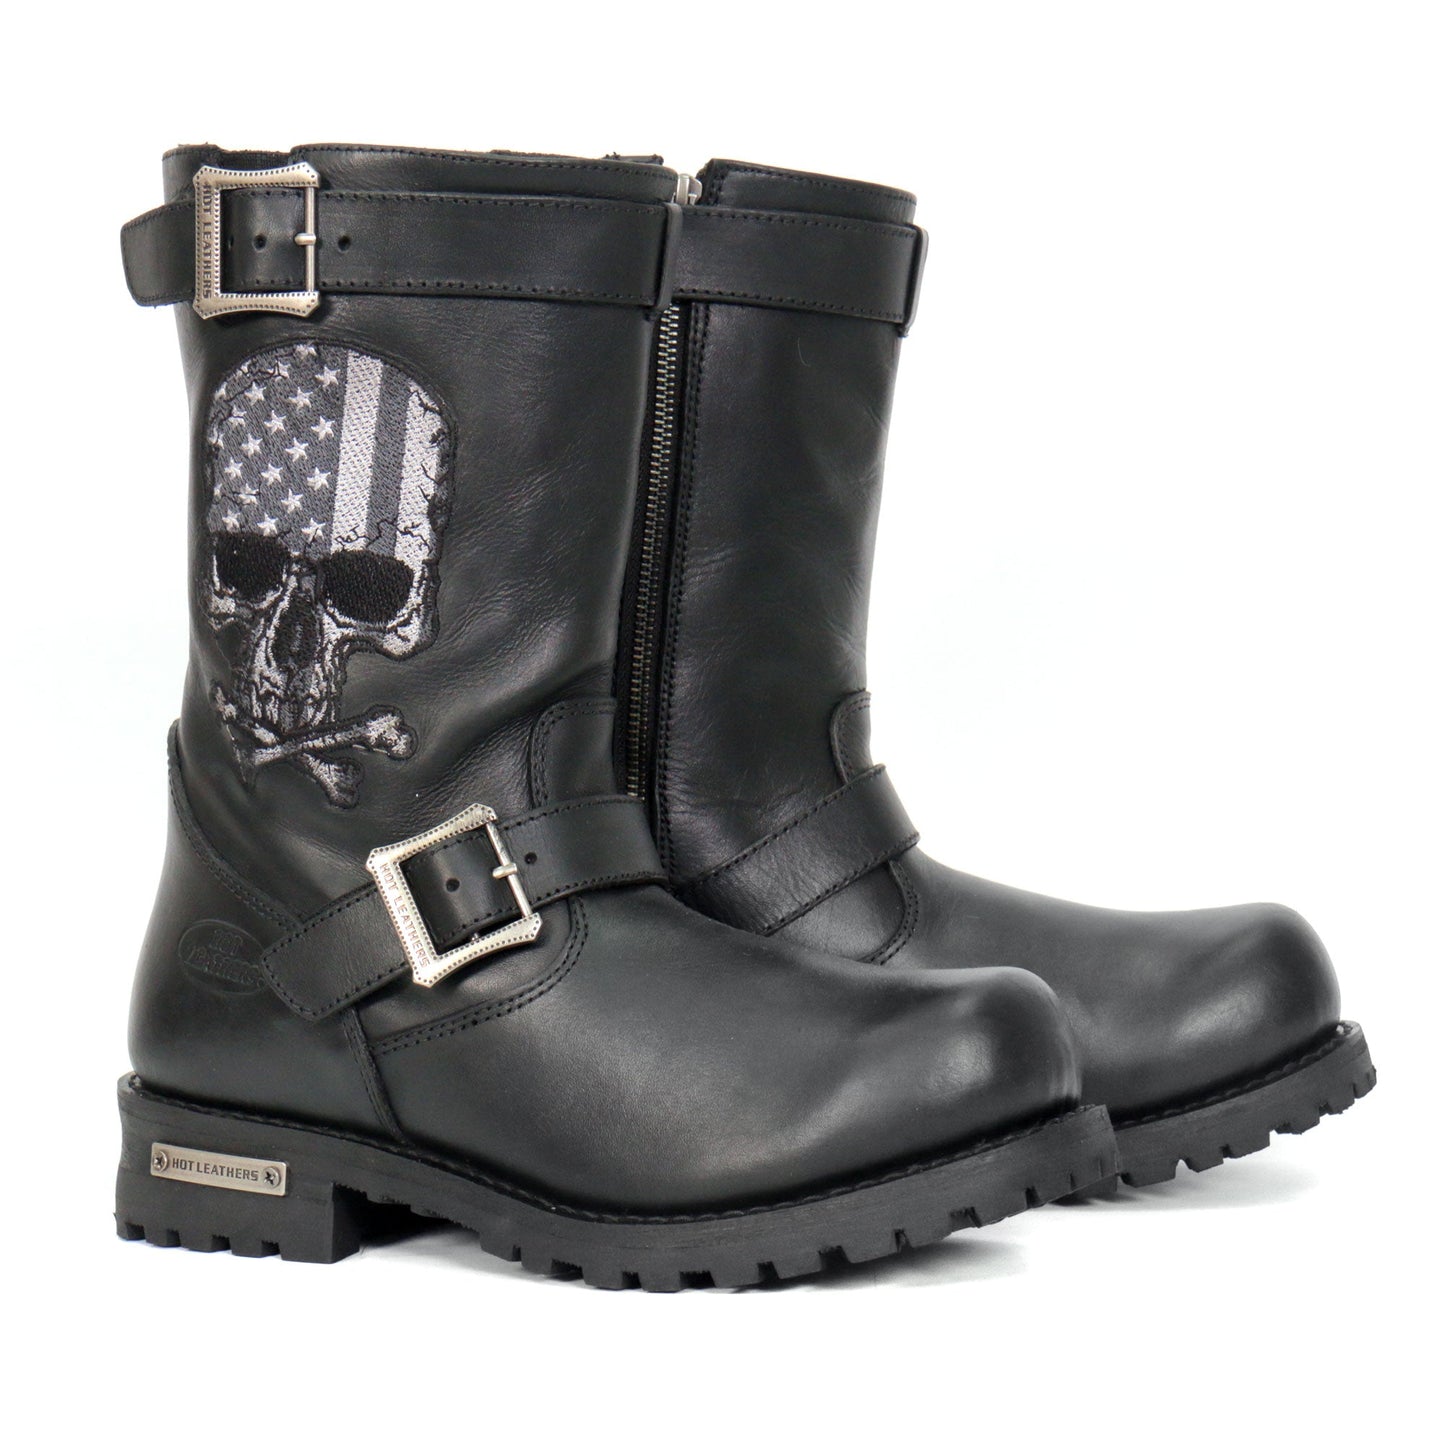 Men’s Black Tall Harness Flag Skull Boot with Round Toe